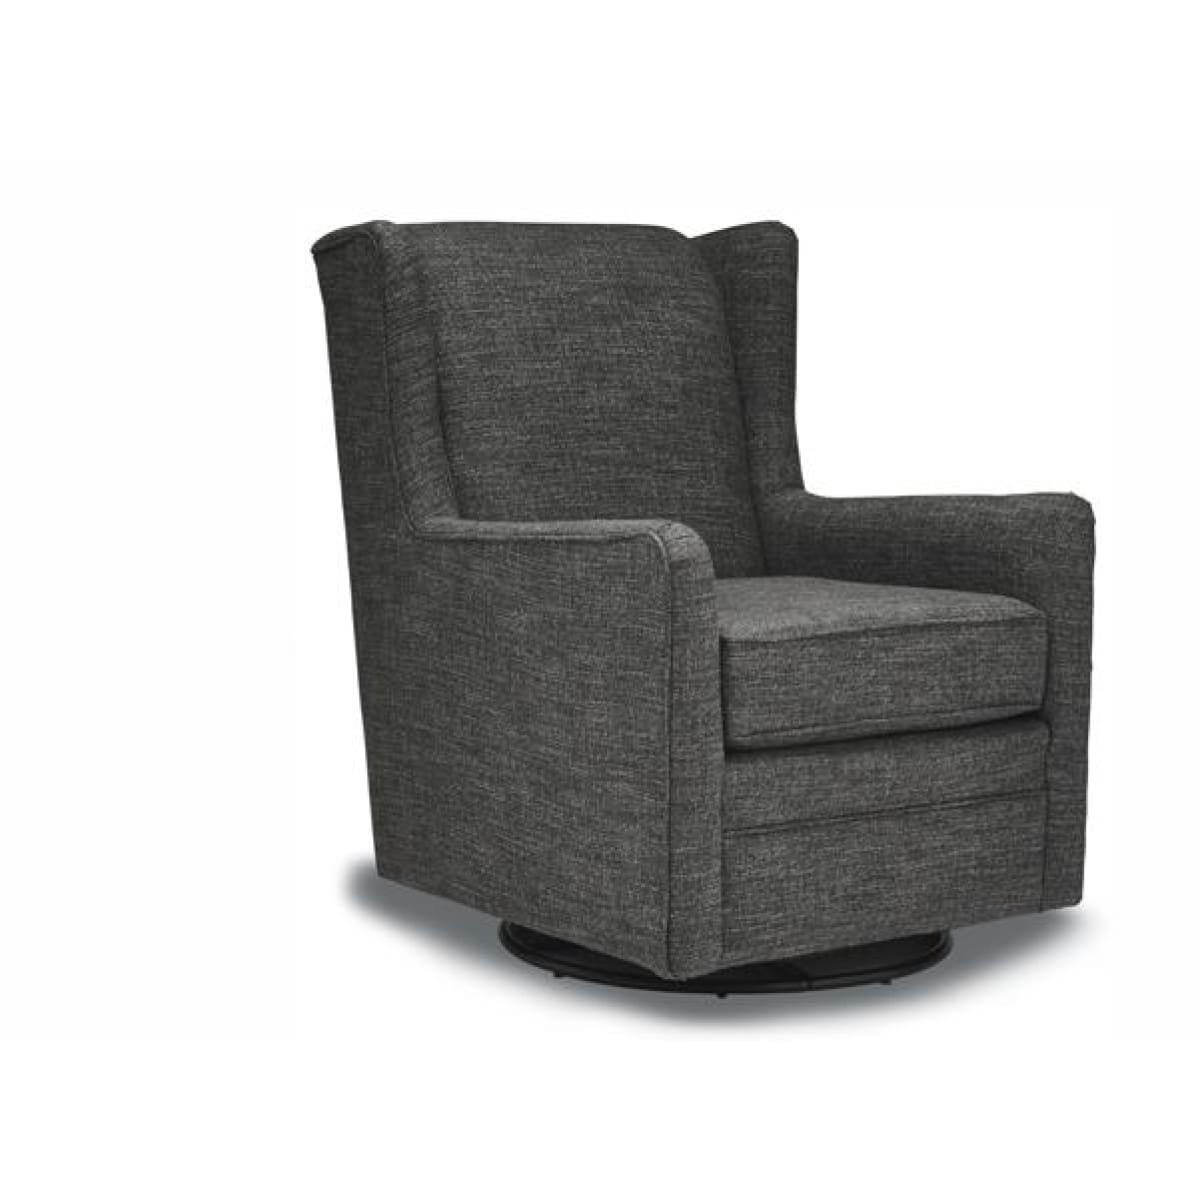 Stone Accent Chair - accent chairs